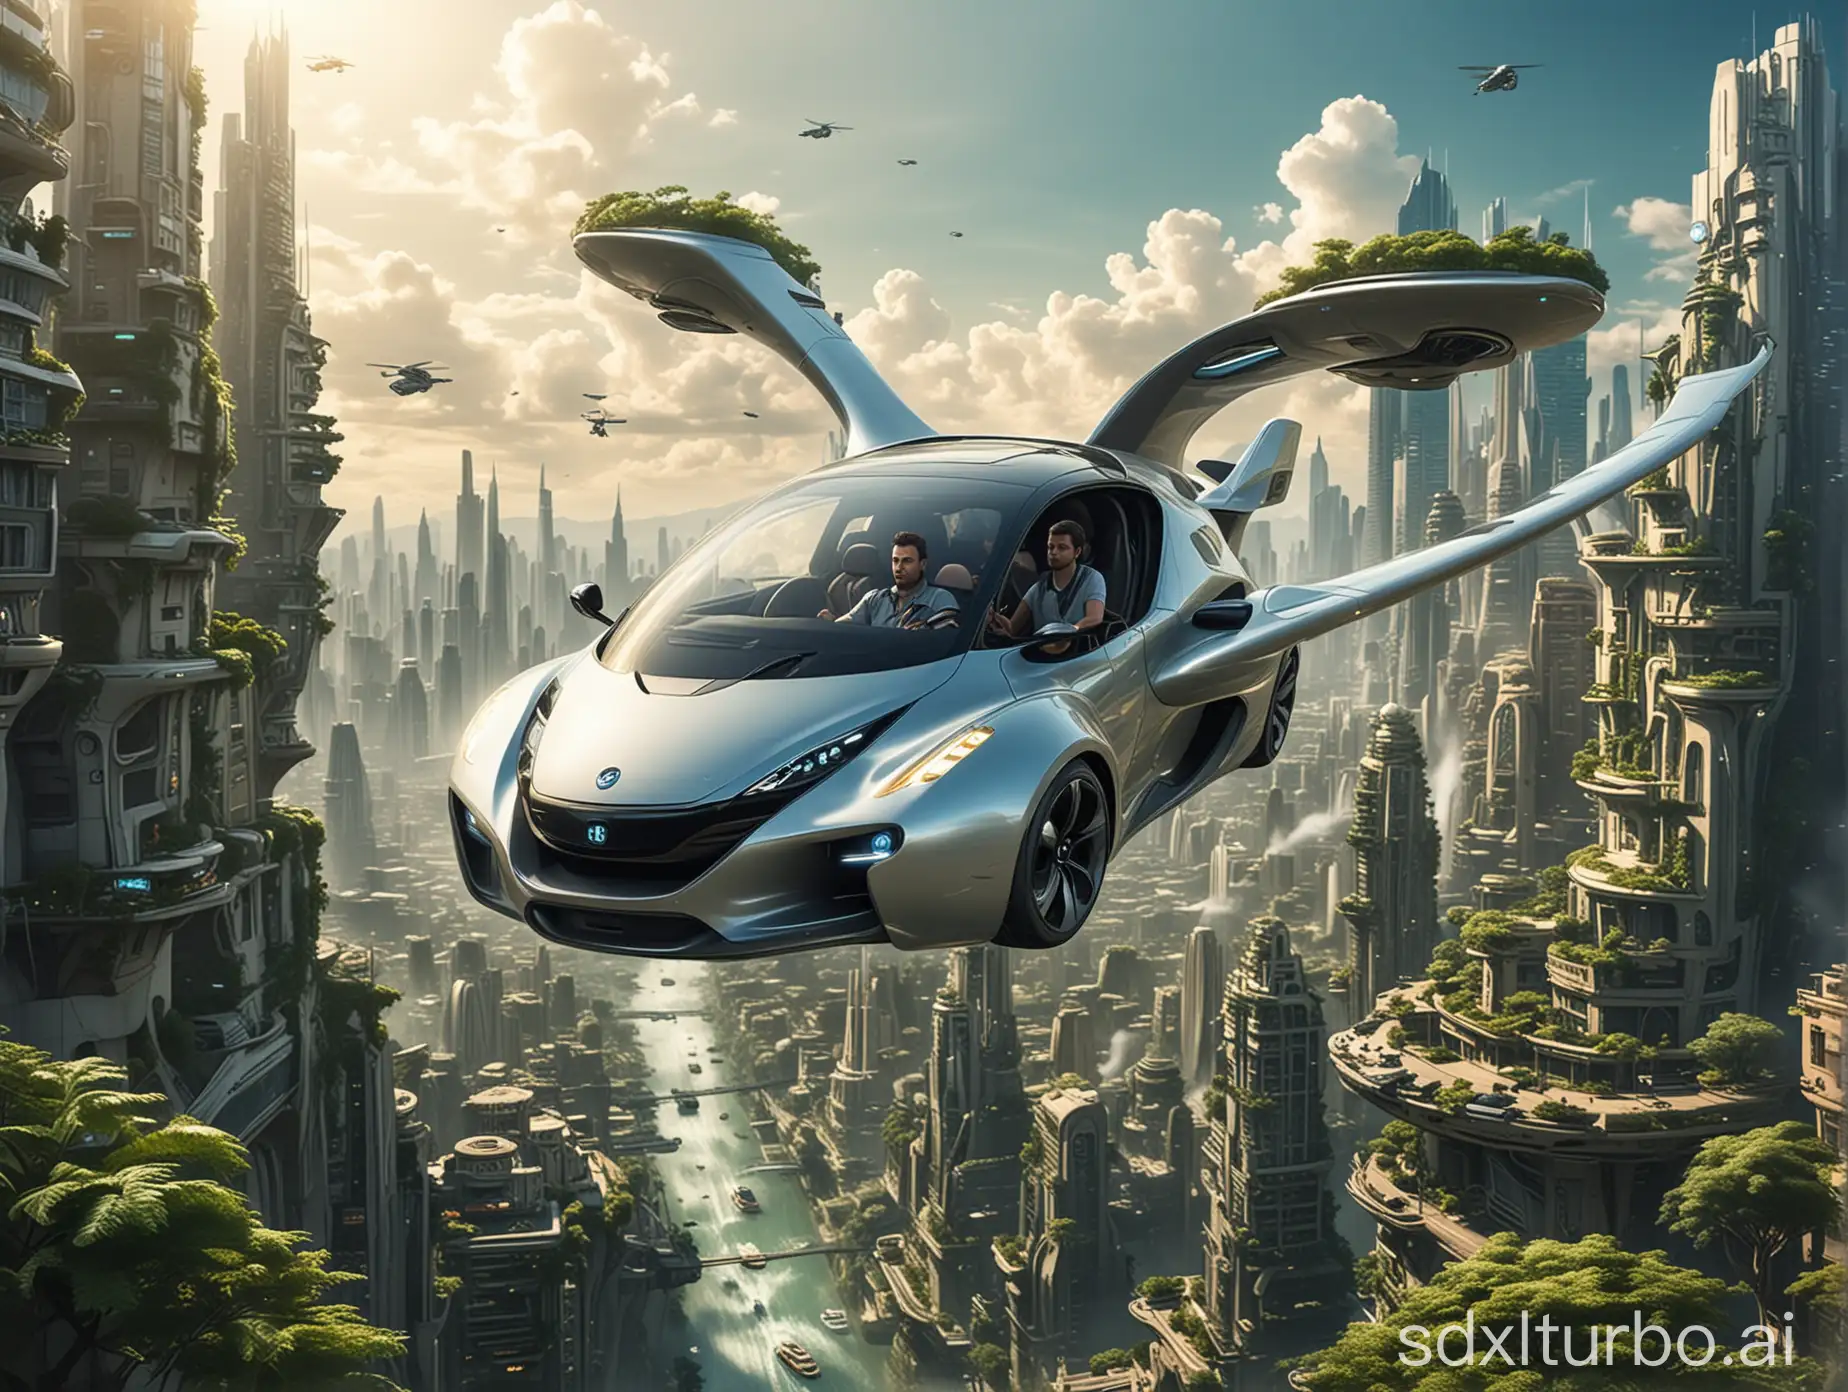 Futuristic-City-Commute-Man-in-Flying-Car-Over-Technological-Metropolis